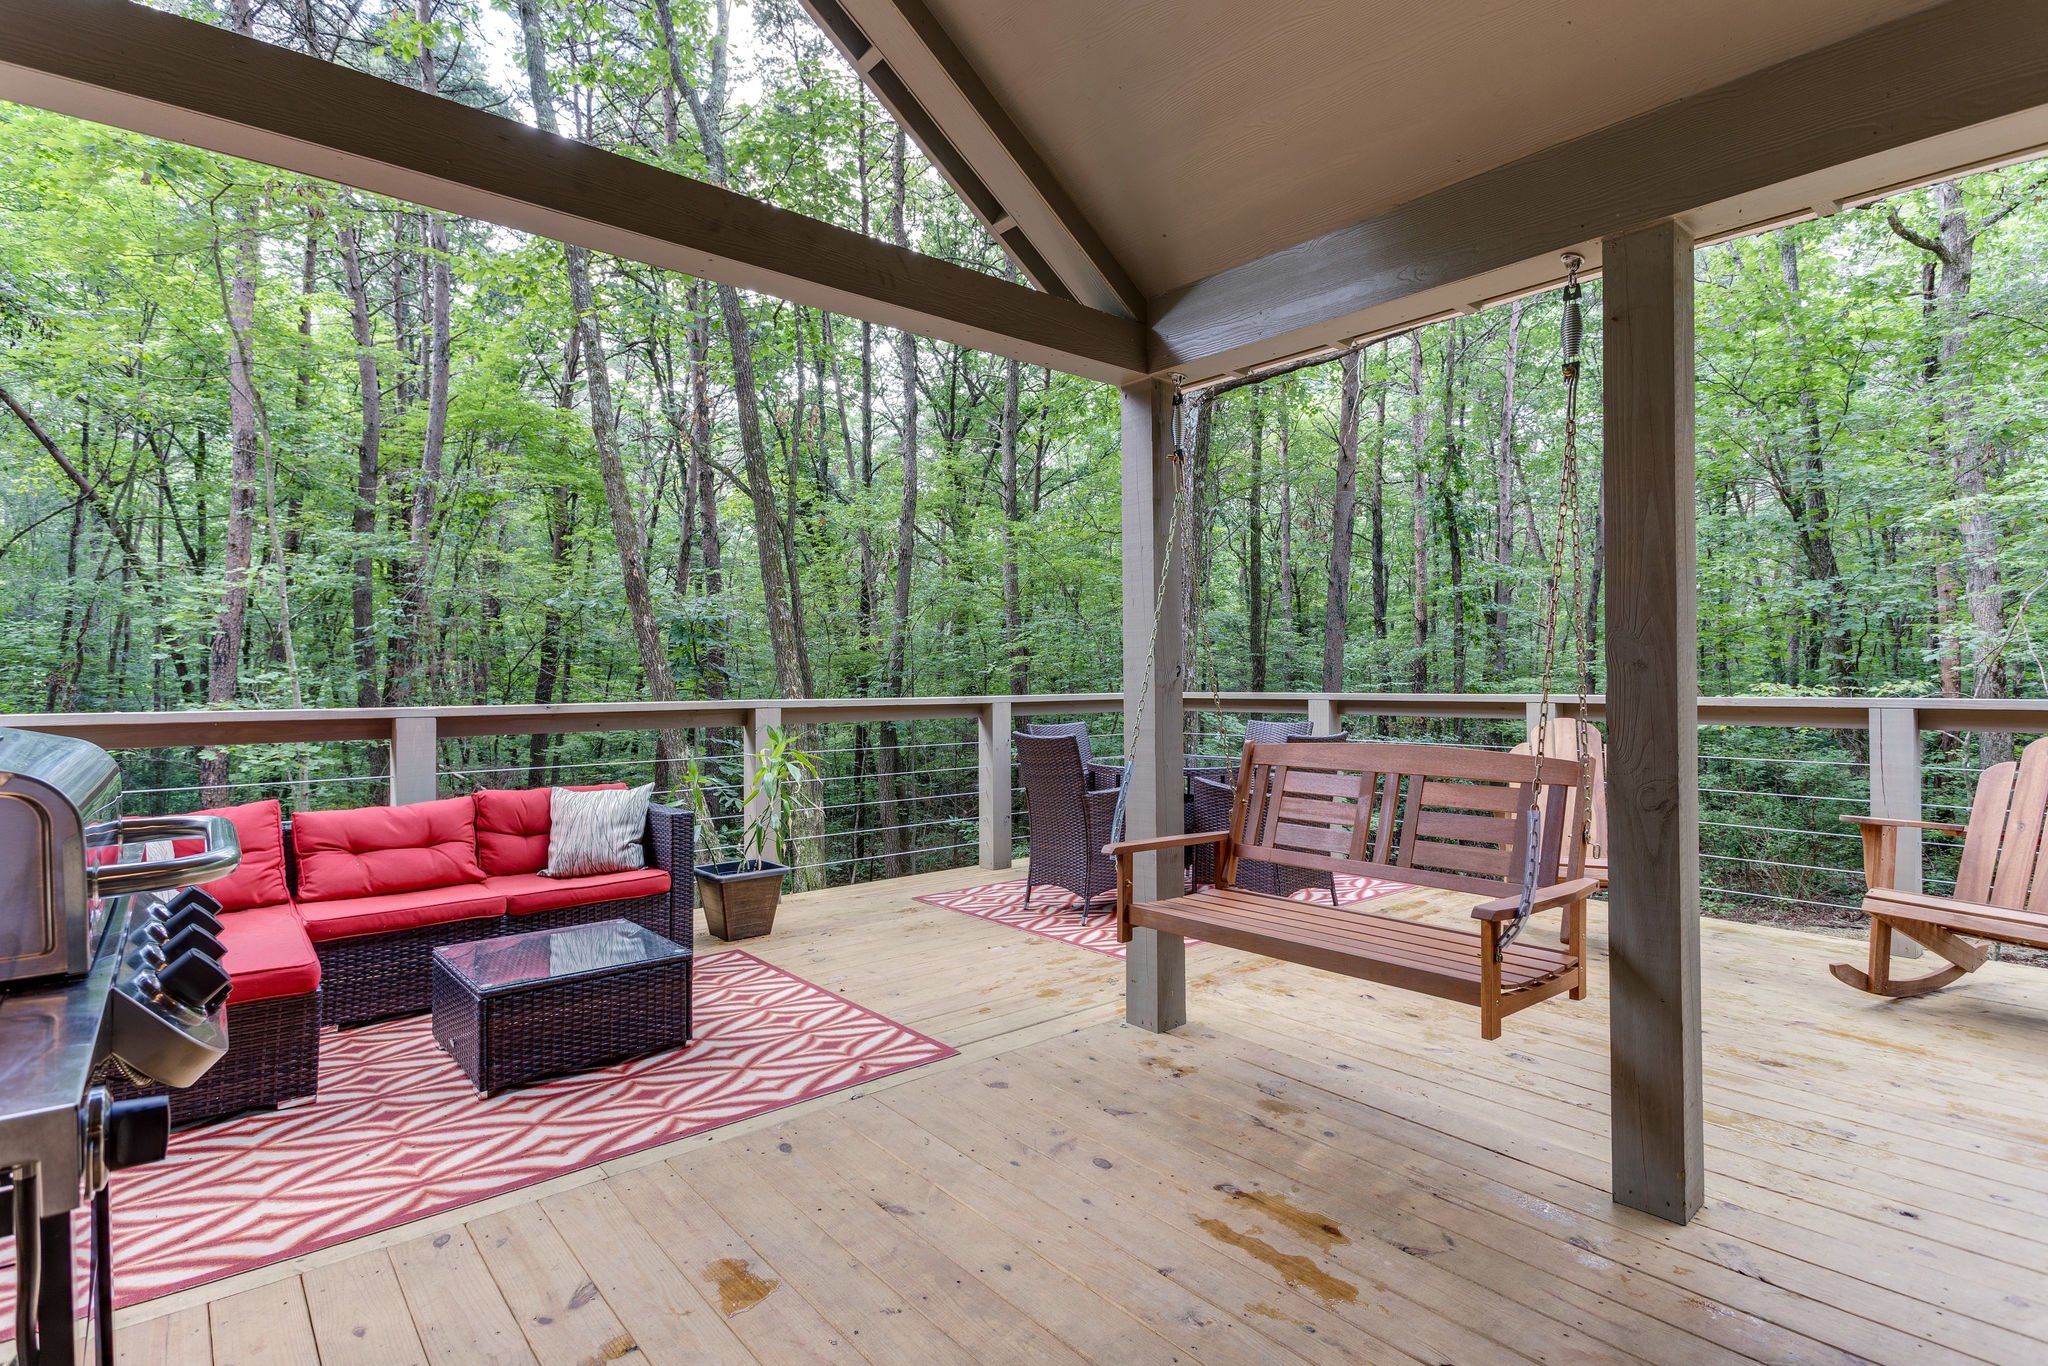 tiny_home_Porch_swing_deck_grill_covered-2006.jpg